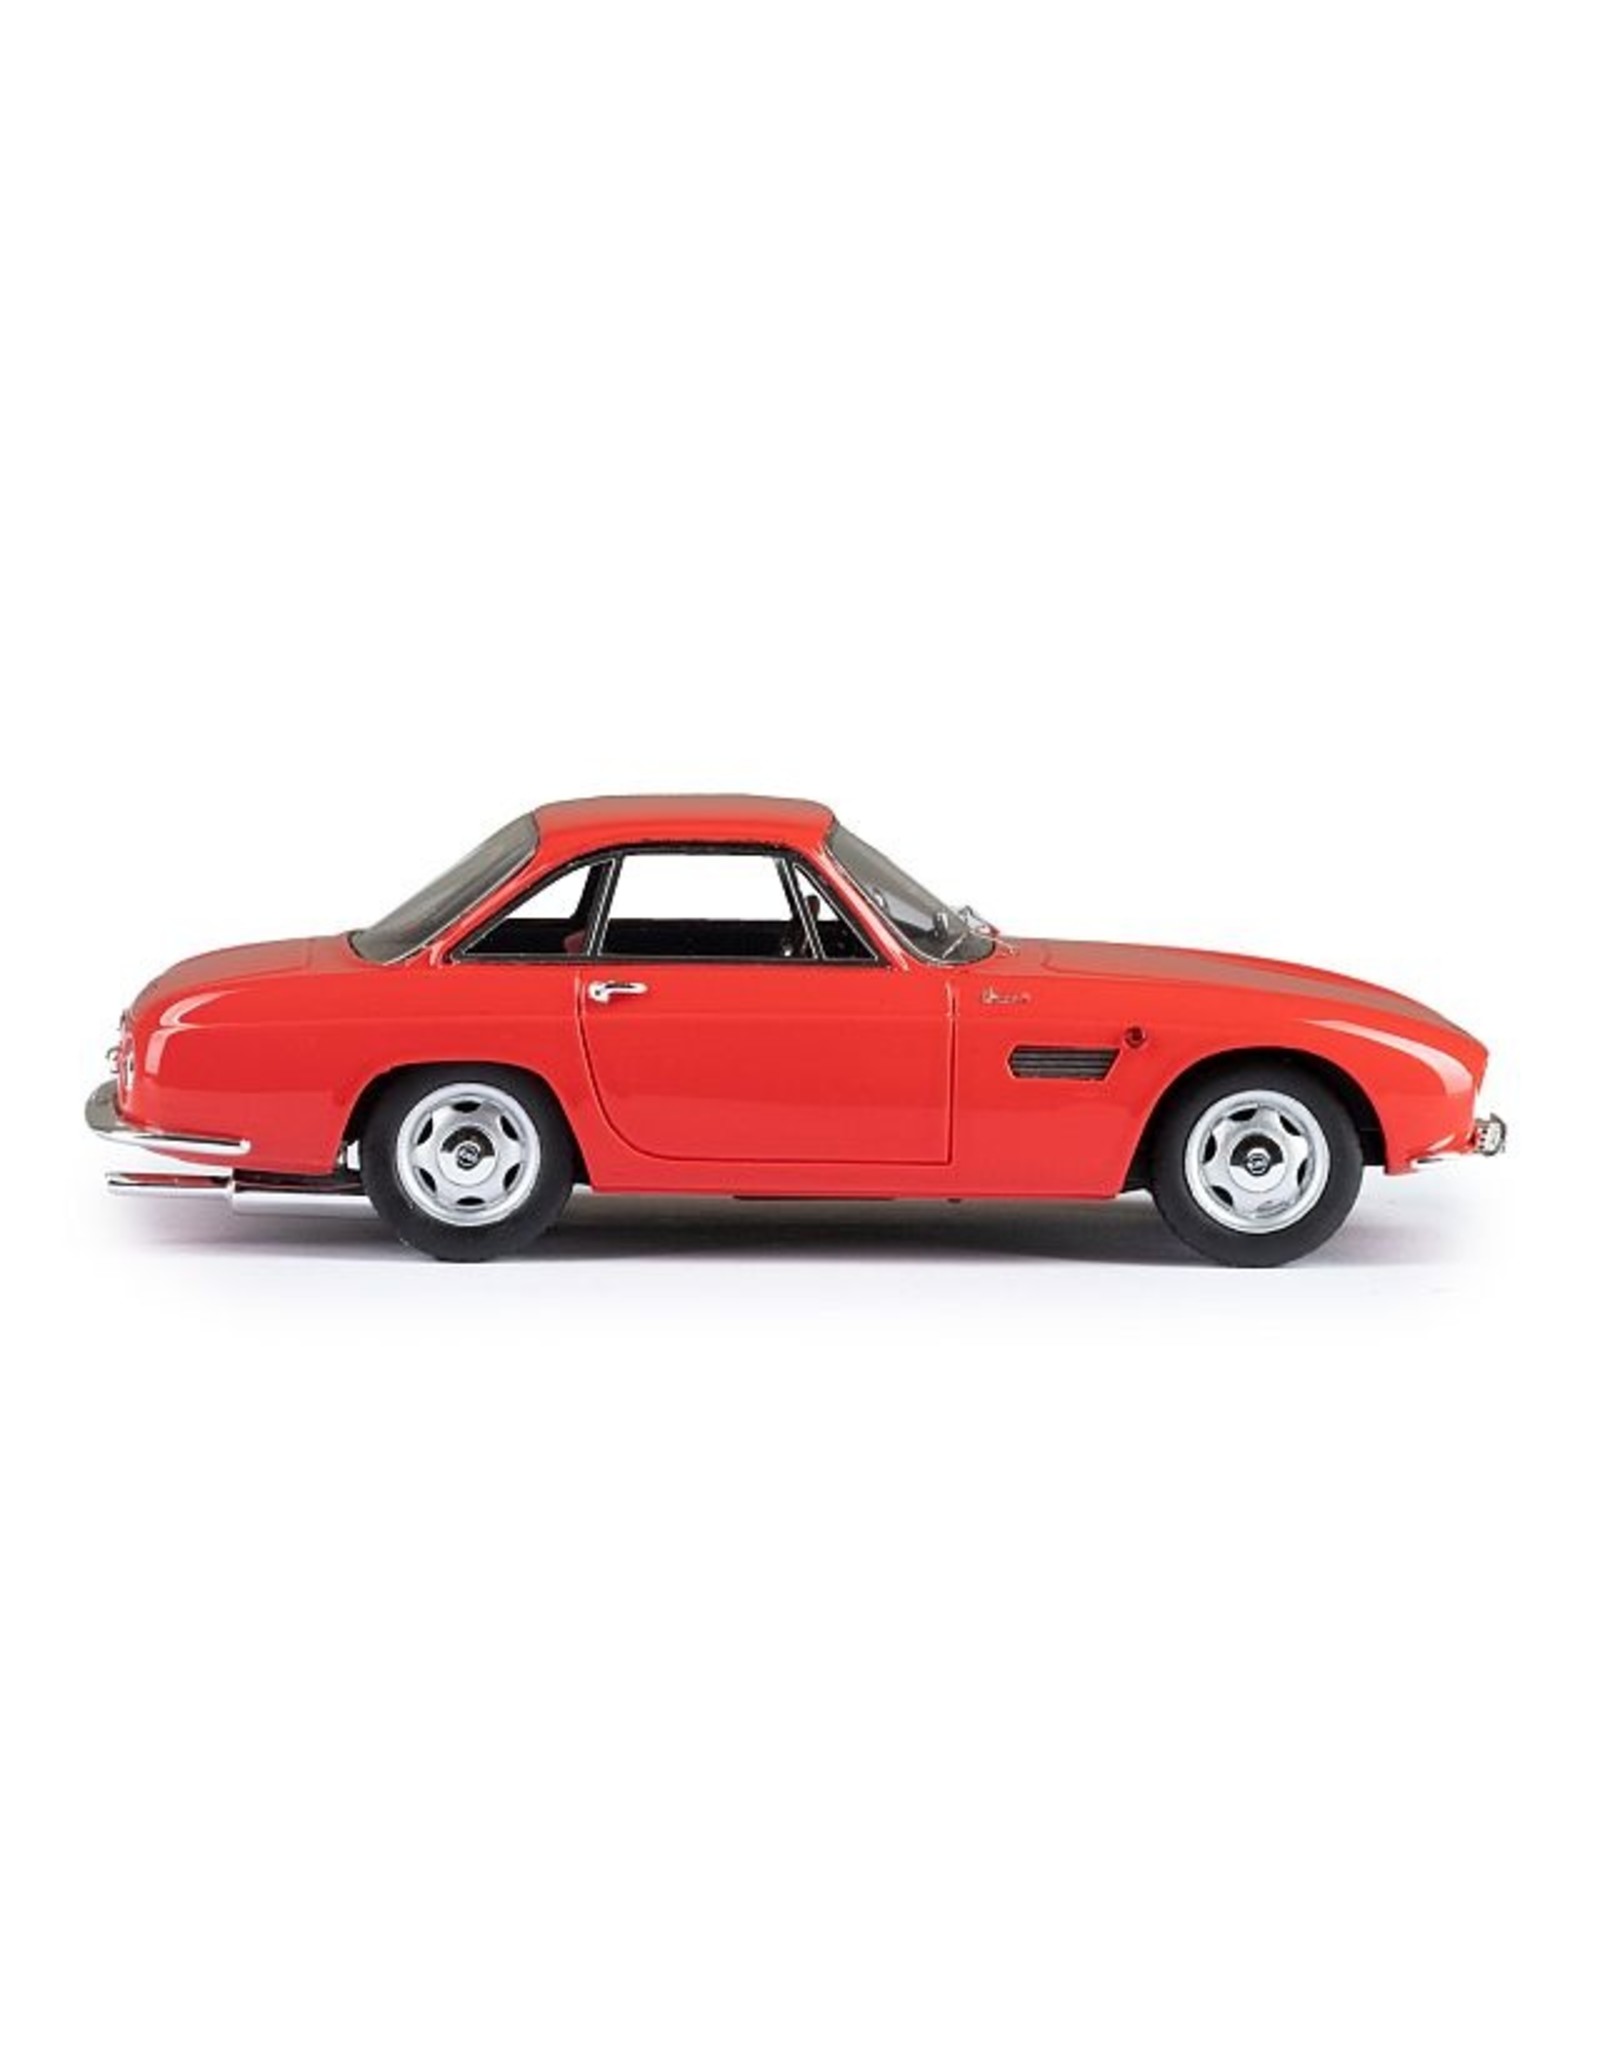 OSCA BY FISSORE Osca 1600 GT coupe by Fissore(1963)red